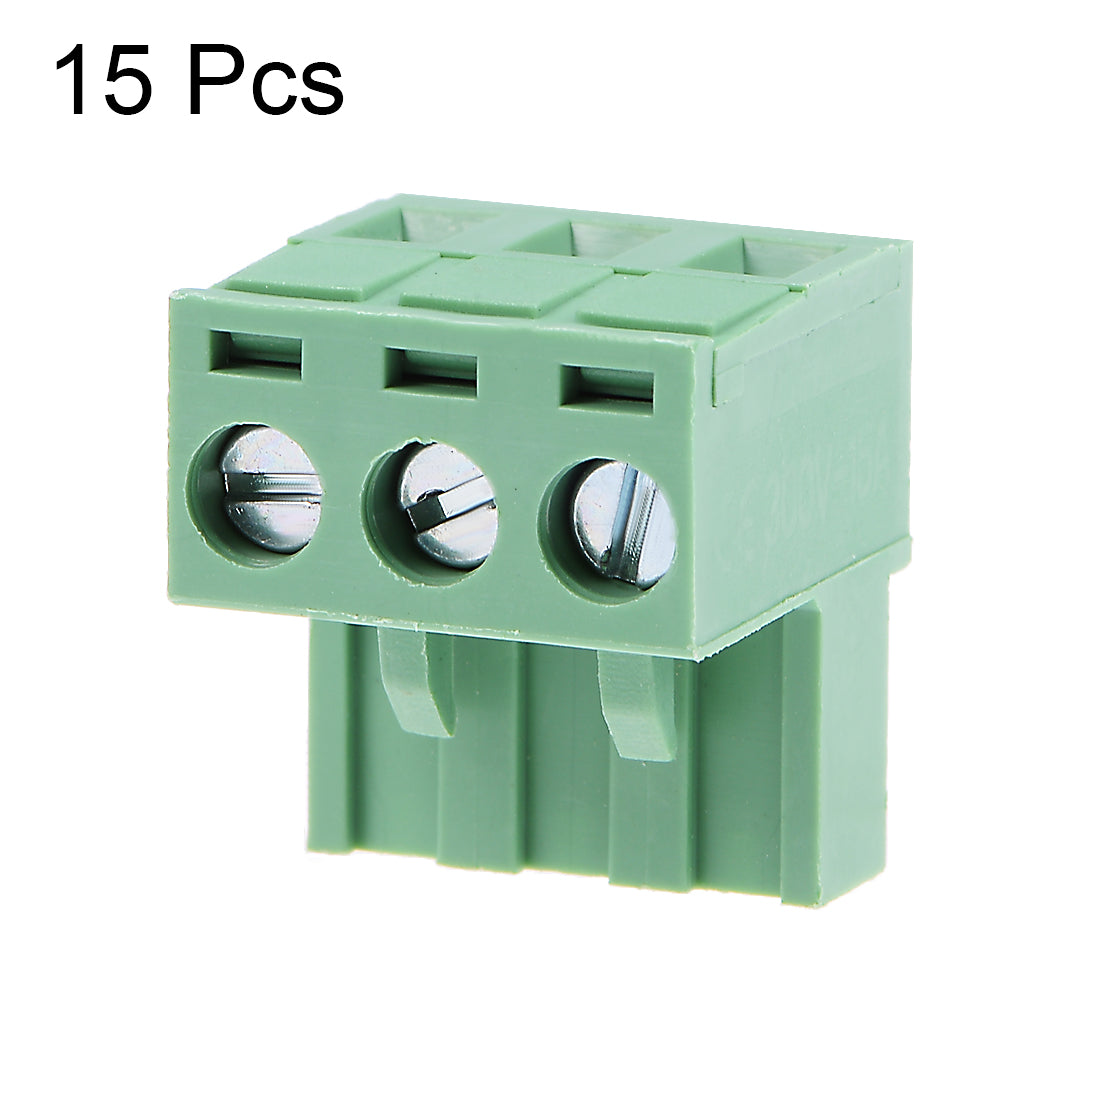 uxcell Uxcell 15Pcs AC300V 15A 5.08mm Pitch 3P Flat Angle Needle Seat Insert-In PCB Terminal Block Connector green